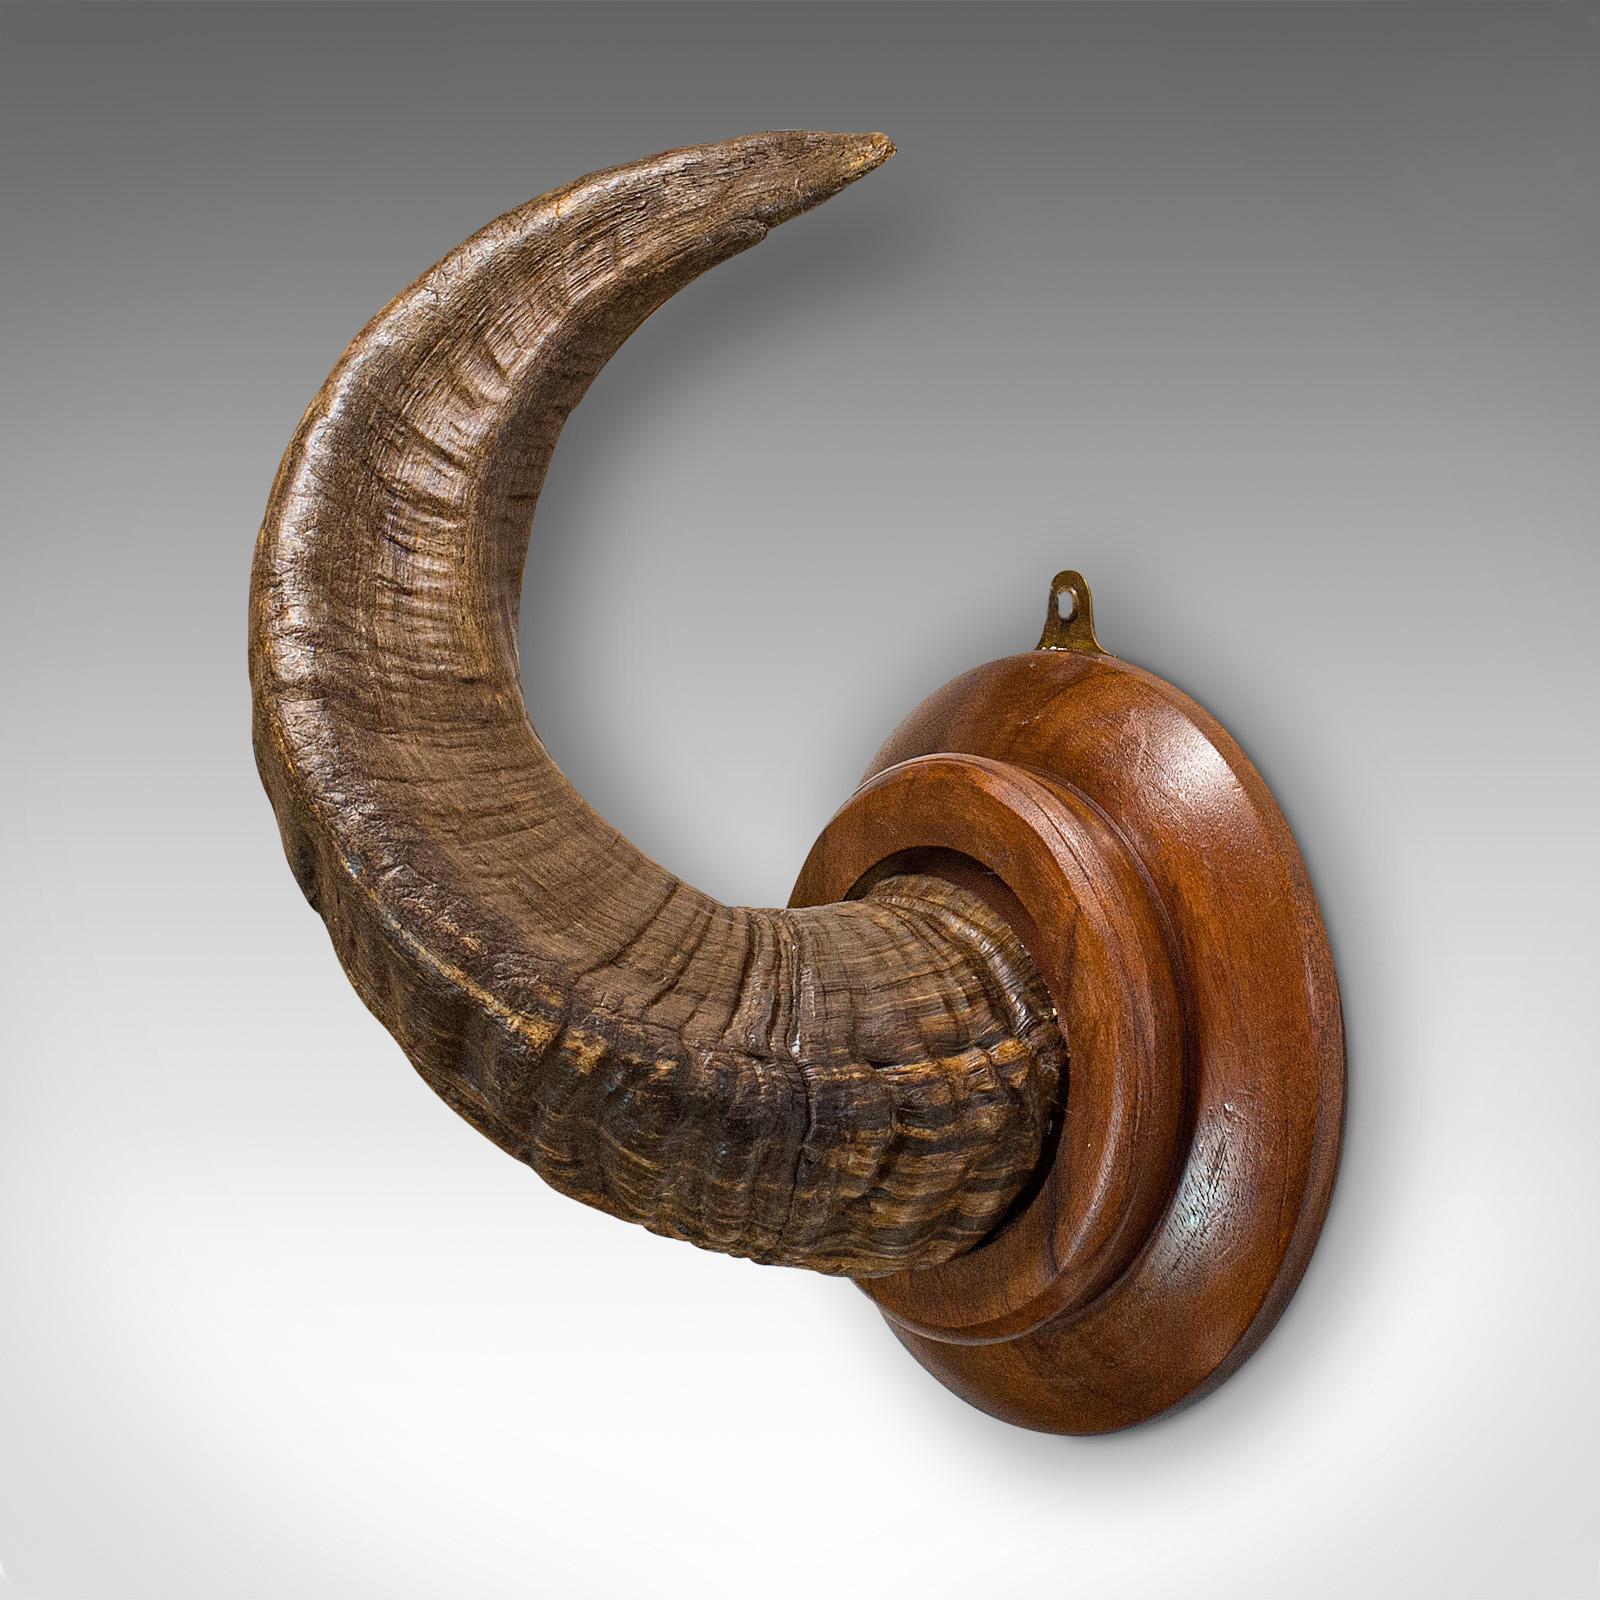 This is a vintage ram's horn. An English, mounted display piece, dating to the late 20th century, circa 1970.

Distinctive countryside decor
Displaying a desirable aged patina
Ram's horn with fantastic curled form and grain detail
Mounted